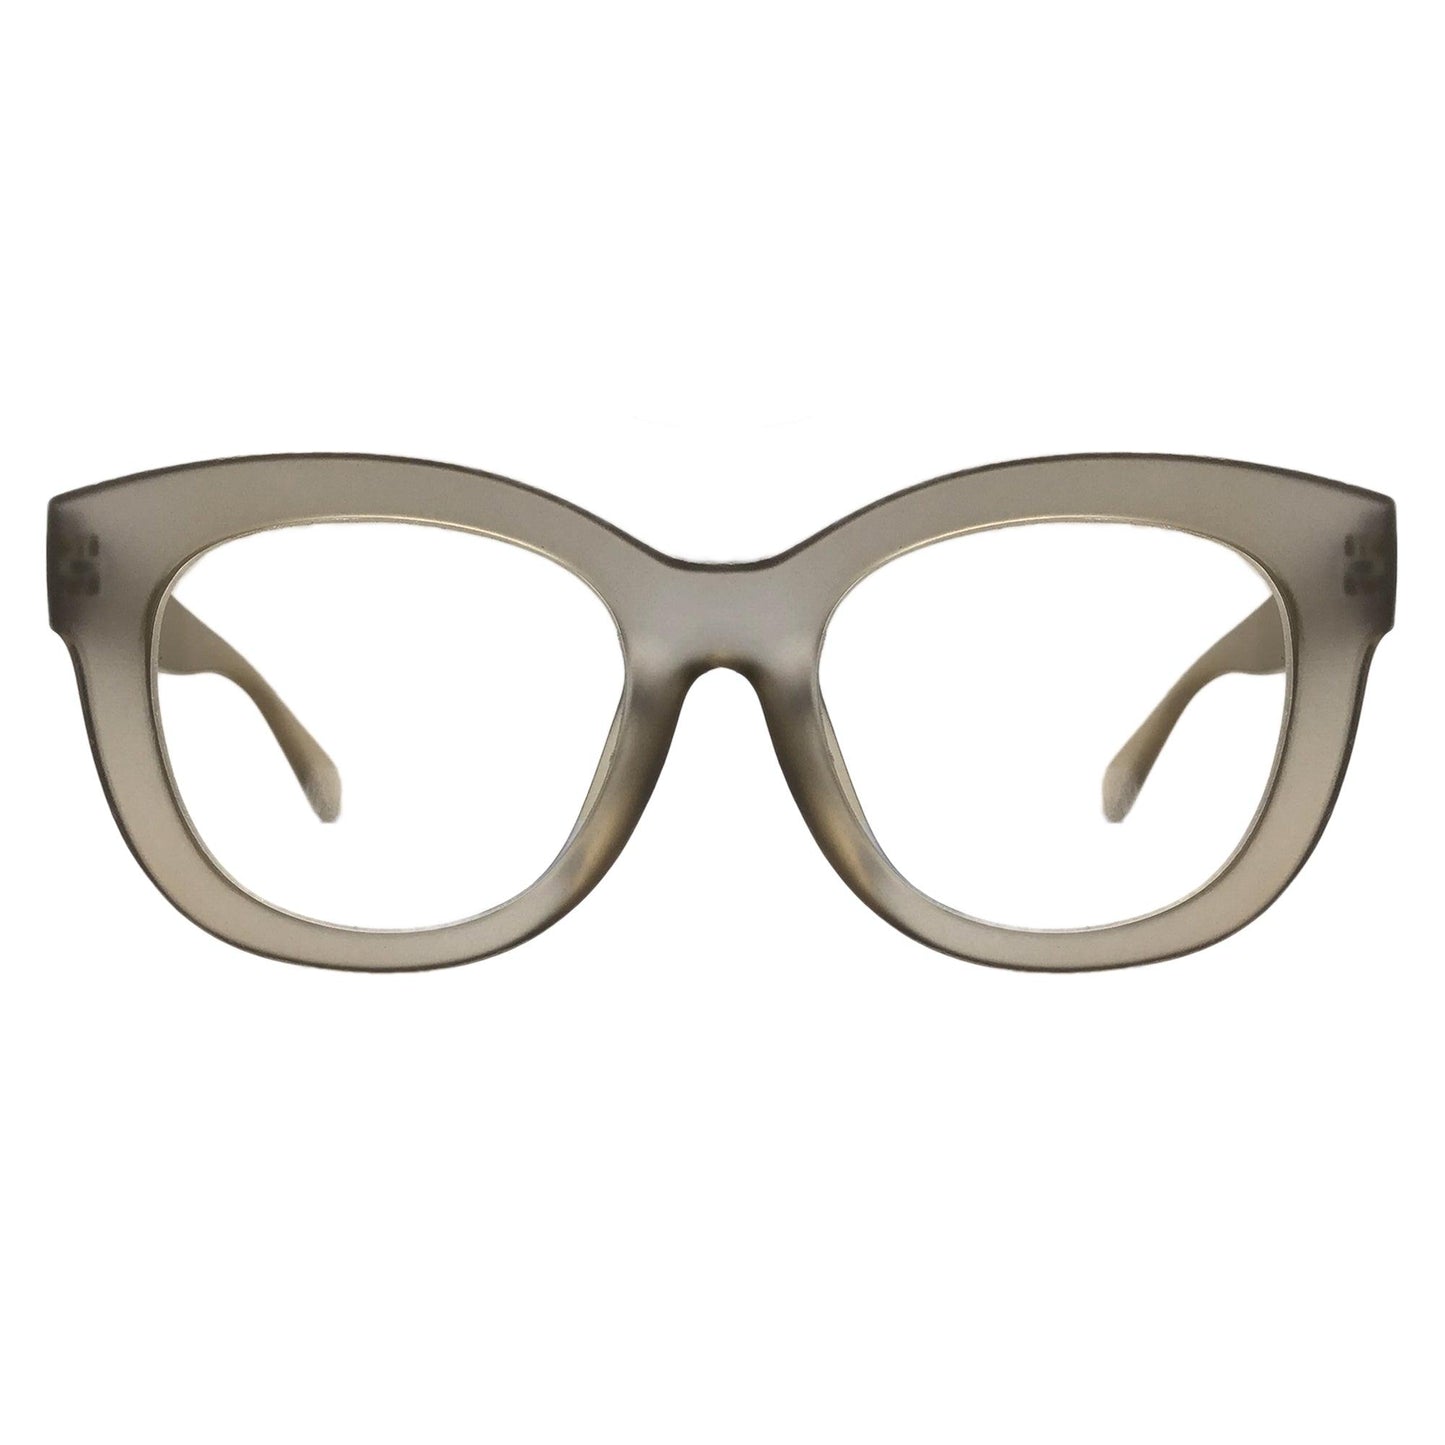 Helen Taupe Glasses